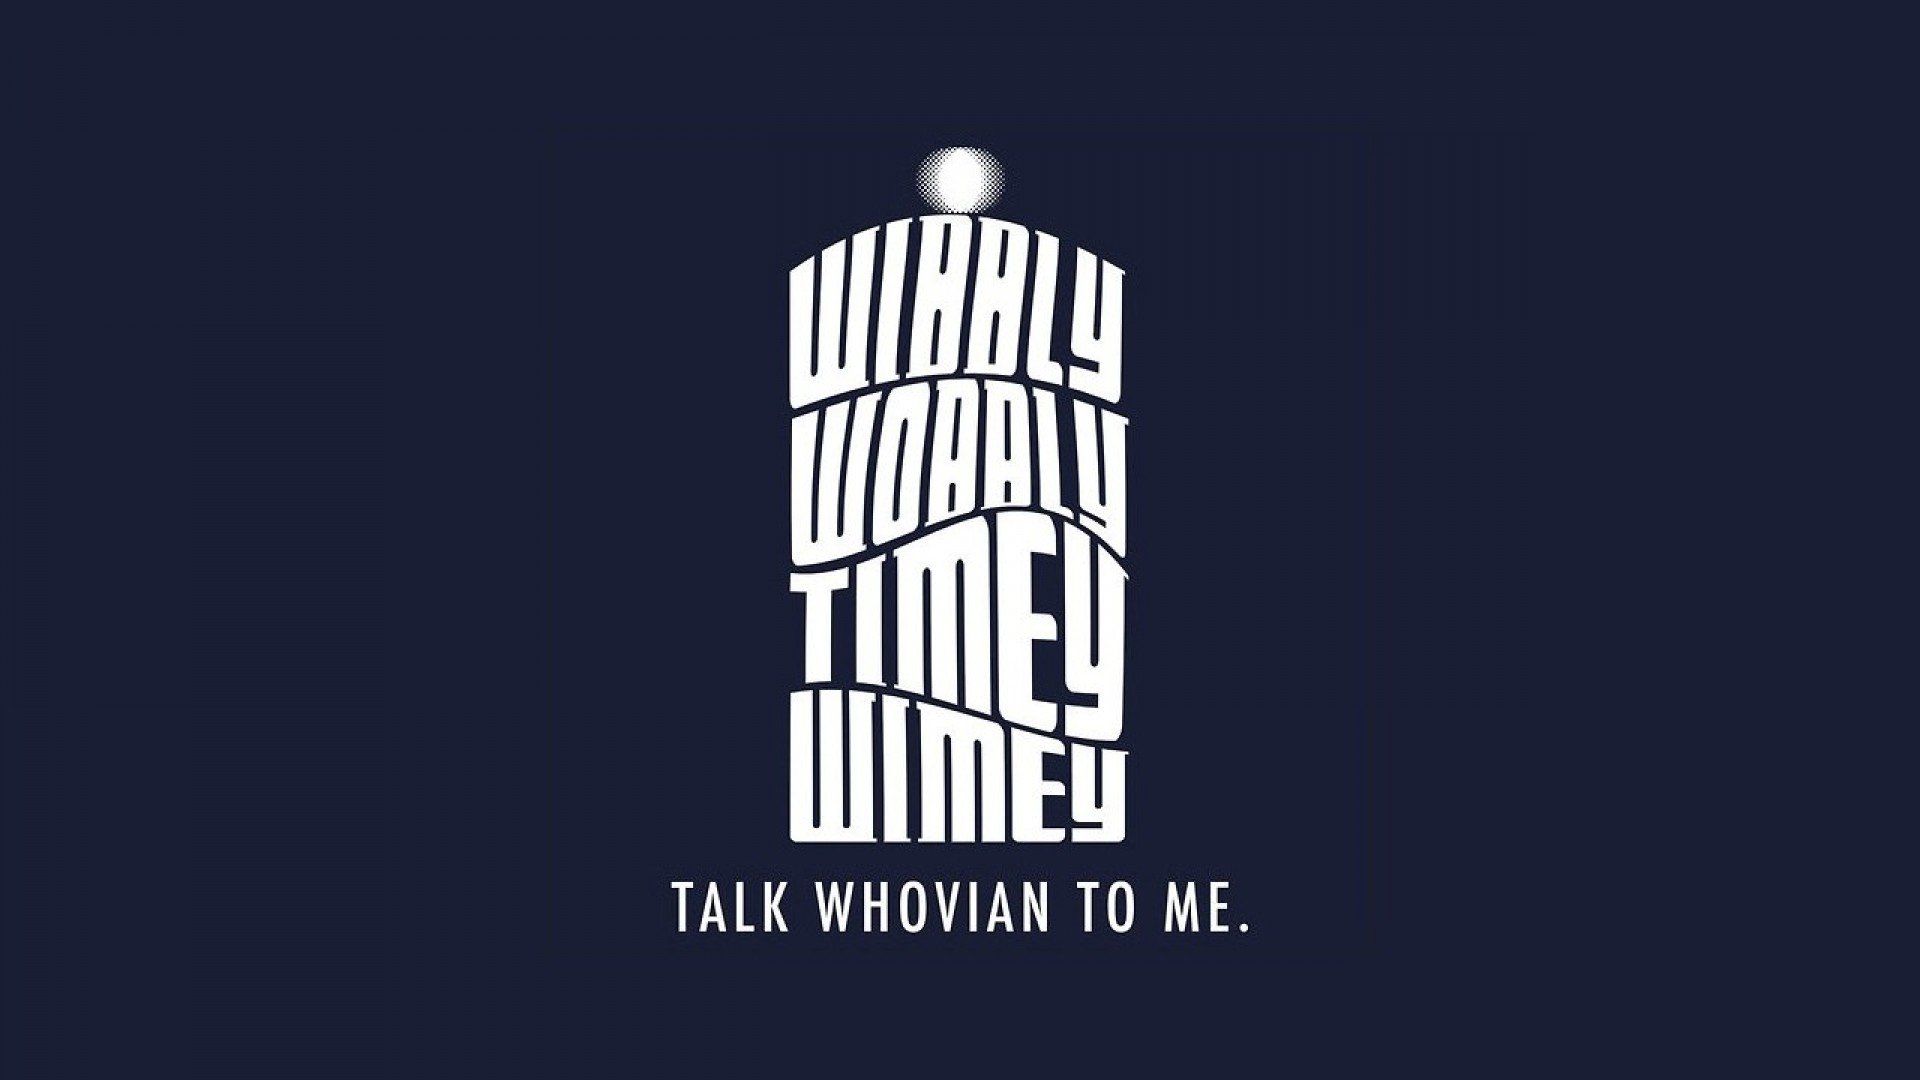 Hd Dr Who Tardis 4k Picture - Dr Who Wibbly Wobbly Timey Wimey - 1920x1080  Wallpaper 